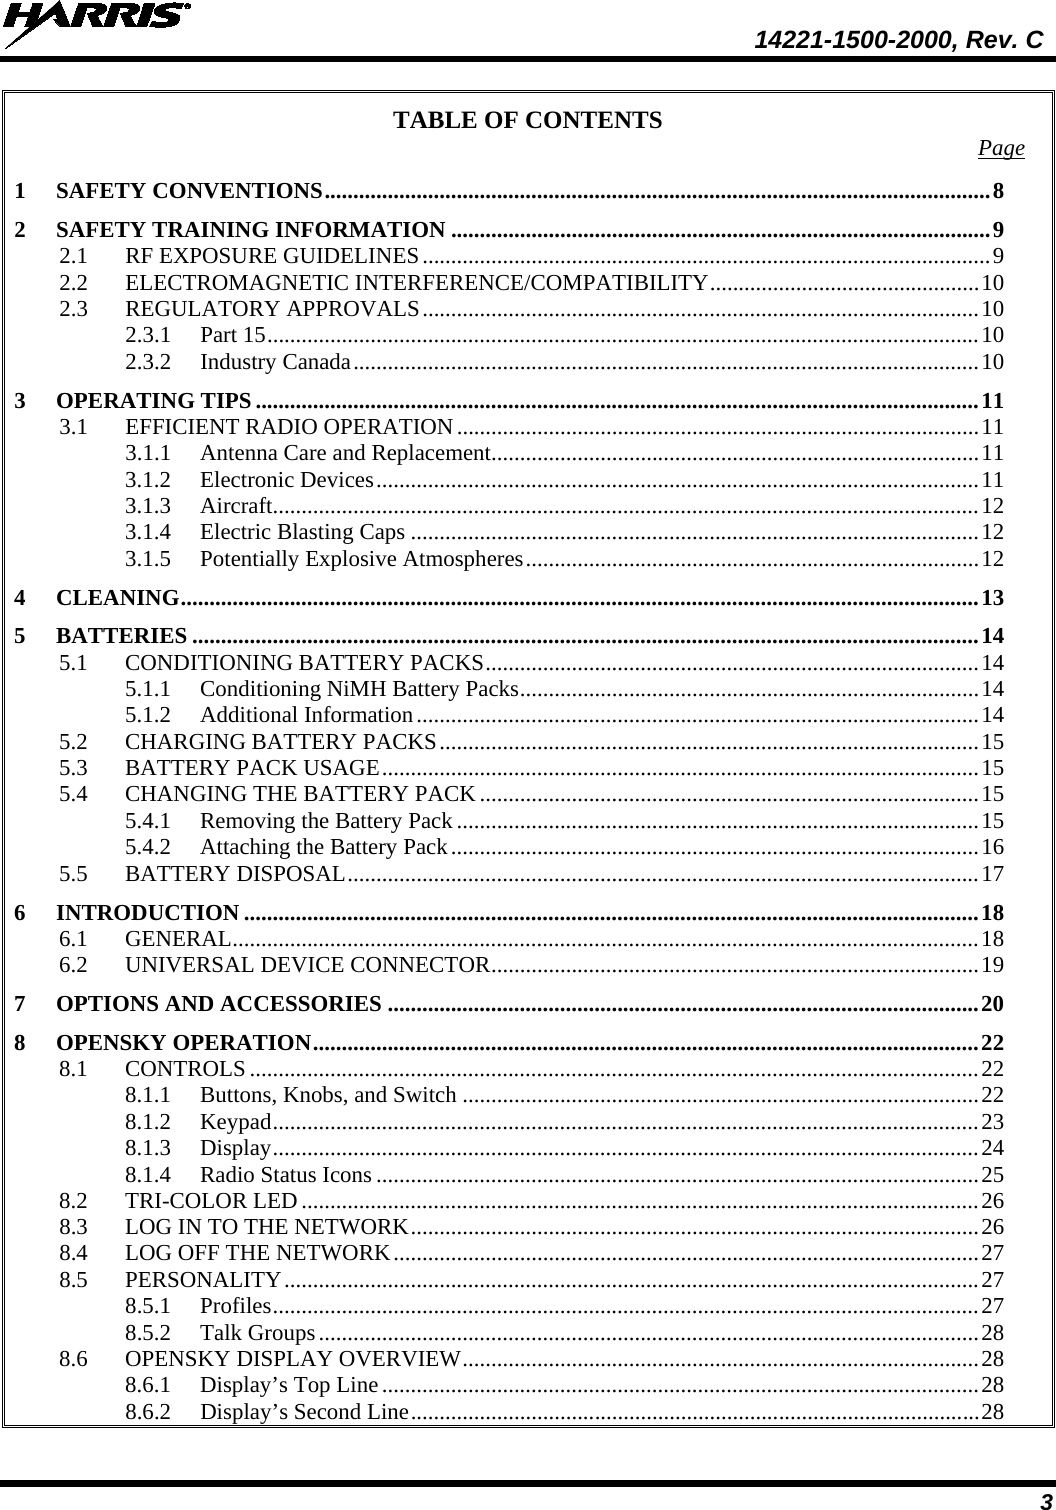  14221-1500-2000, Rev. C 3 TABLE OF CONTENTS Page 1 SAFETY CONVENTIONS .................................................................................................................... 8 2 SAFETY TRAINING INFORMATION .............................................................................................. 9 2.1 RF EXPOSURE GUIDELINES ................................................................................................... 9 2.2 ELECTROMAGNETIC INTERFERENCE/COMPATIBILITY ............................................... 10 2.3 REGULATORY APPROVALS ................................................................................................. 10 2.3.1 Part 15 ............................................................................................................................ 10 2.3.2 Industry Canada ............................................................................................................. 10 3 OPERATING TIPS .............................................................................................................................. 11 3.1 EFFICIENT RADIO OPERATION ........................................................................................... 11 3.1.1 Antenna Care and Replacement ..................................................................................... 11 3.1.2 Electronic Devices ......................................................................................................... 11 3.1.3 Aircraft........................................................................................................................... 12 3.1.4 Electric Blasting Caps ................................................................................................... 12 3.1.5 Potentially Explosive Atmospheres ............................................................................... 12 4 CLEANING ........................................................................................................................................... 13 5 BATTERIES ......................................................................................................................................... 14 5.1 CONDITIONING BATTERY PACKS ...................................................................................... 14 5.1.1 Conditioning NiMH Battery Packs ................................................................................ 14 5.1.2 Additional Information .................................................................................................. 14 5.2 CHARGING BATTERY PACKS .............................................................................................. 15 5.3 BATTERY PACK USAGE ........................................................................................................ 15 5.4 CHANGING THE BATTERY PACK ....................................................................................... 15 5.4.1 Removing the Battery Pack ........................................................................................... 15 5.4.2 Attaching the Battery Pack ............................................................................................ 16 5.5 BATTERY DISPOSAL .............................................................................................................. 17 6 INTRODUCTION ................................................................................................................................ 18 6.1 GENERAL .................................................................................................................................. 18 6.2 UNIVERSAL DEVICE CONNECTOR ..................................................................................... 19 7 OPTIONS AND ACCESSORIES ....................................................................................................... 20 8 OPENSKY OPERATION .................................................................................................................... 22 8.1 CONTROLS ............................................................................................................................... 22 8.1.1 Buttons, Knobs, and Switch .......................................................................................... 22 8.1.2 Keypad ........................................................................................................................... 23 8.1.3 Display ........................................................................................................................... 24 8.1.4 Radio Status Icons ......................................................................................................... 25 8.2 TRI-COLOR LED ...................................................................................................................... 26 8.3 LOG IN TO THE NETWORK ................................................................................................... 26 8.4 LOG OFF THE NETWORK ...................................................................................................... 27 8.5 PERSONALITY ......................................................................................................................... 27 8.5.1 Profiles ........................................................................................................................... 27 8.5.2 Talk Groups ................................................................................................................... 28 8.6 OPENSKY DISPLAY OVERVIEW .......................................................................................... 28 8.6.1 Display’s Top Line ........................................................................................................ 28 8.6.2 Display’s Second Line ................................................................................................... 28 